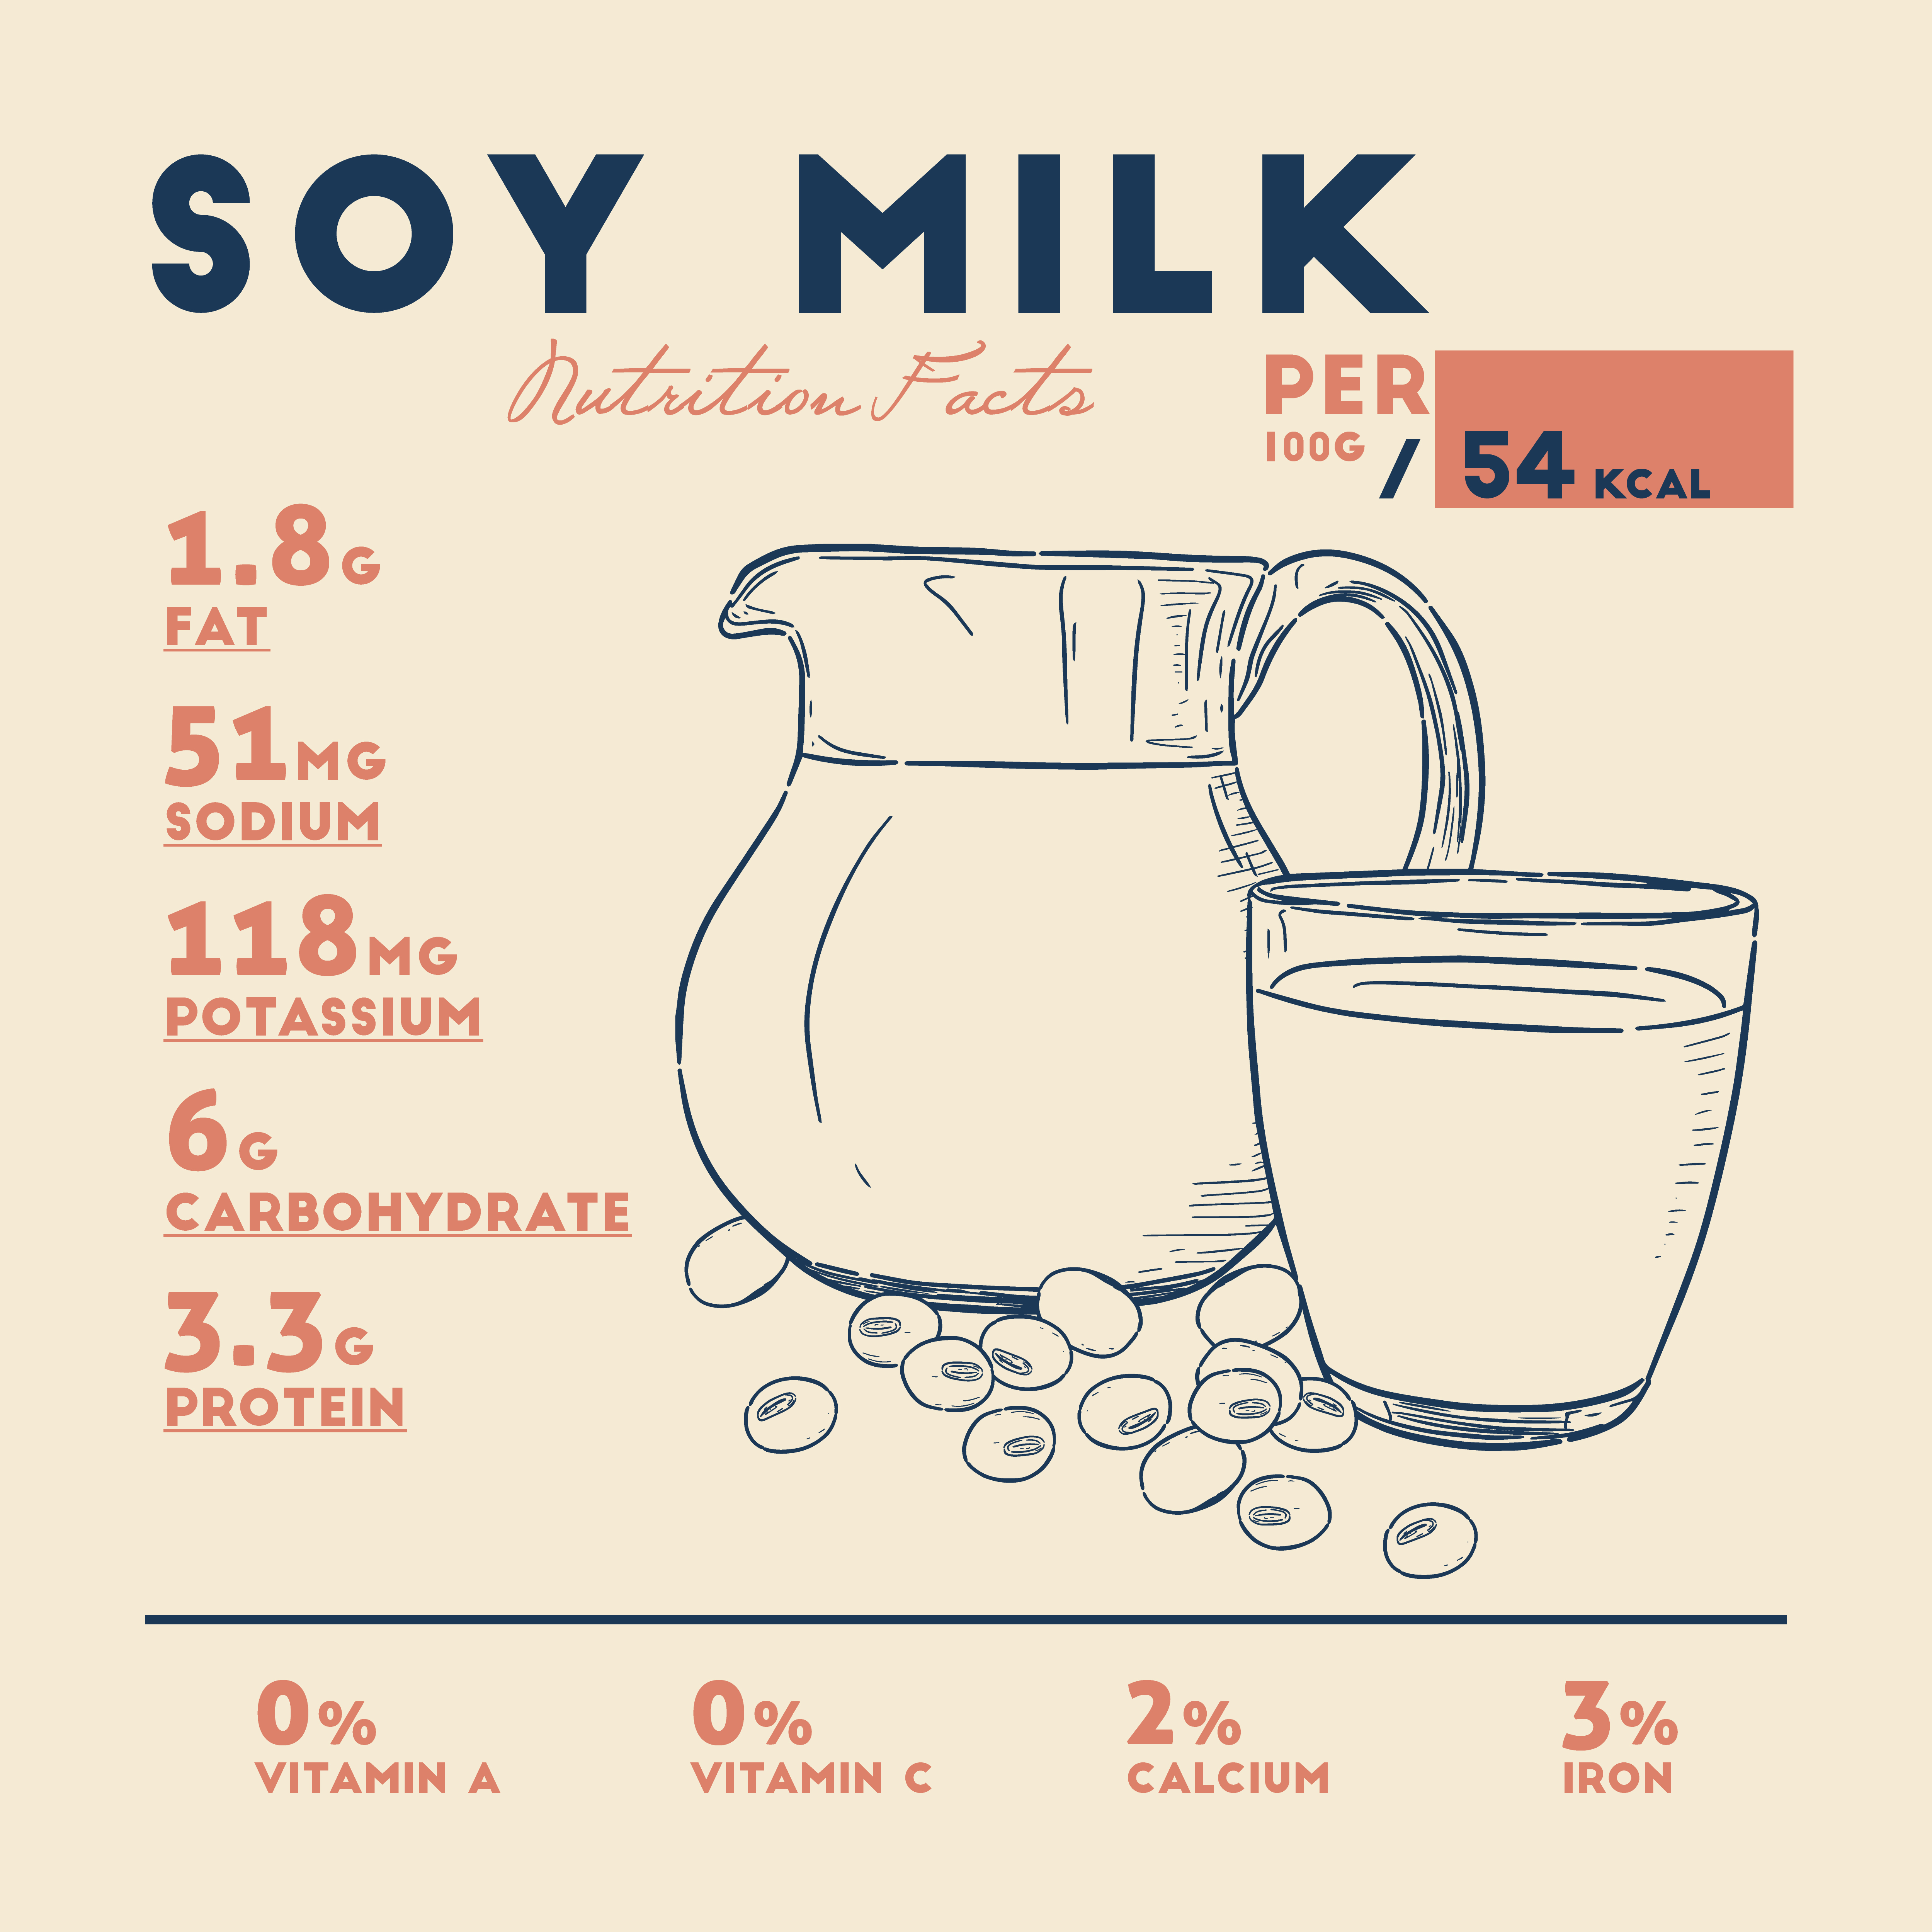 Soy is a great source of protein, calcium, iron and potassium!